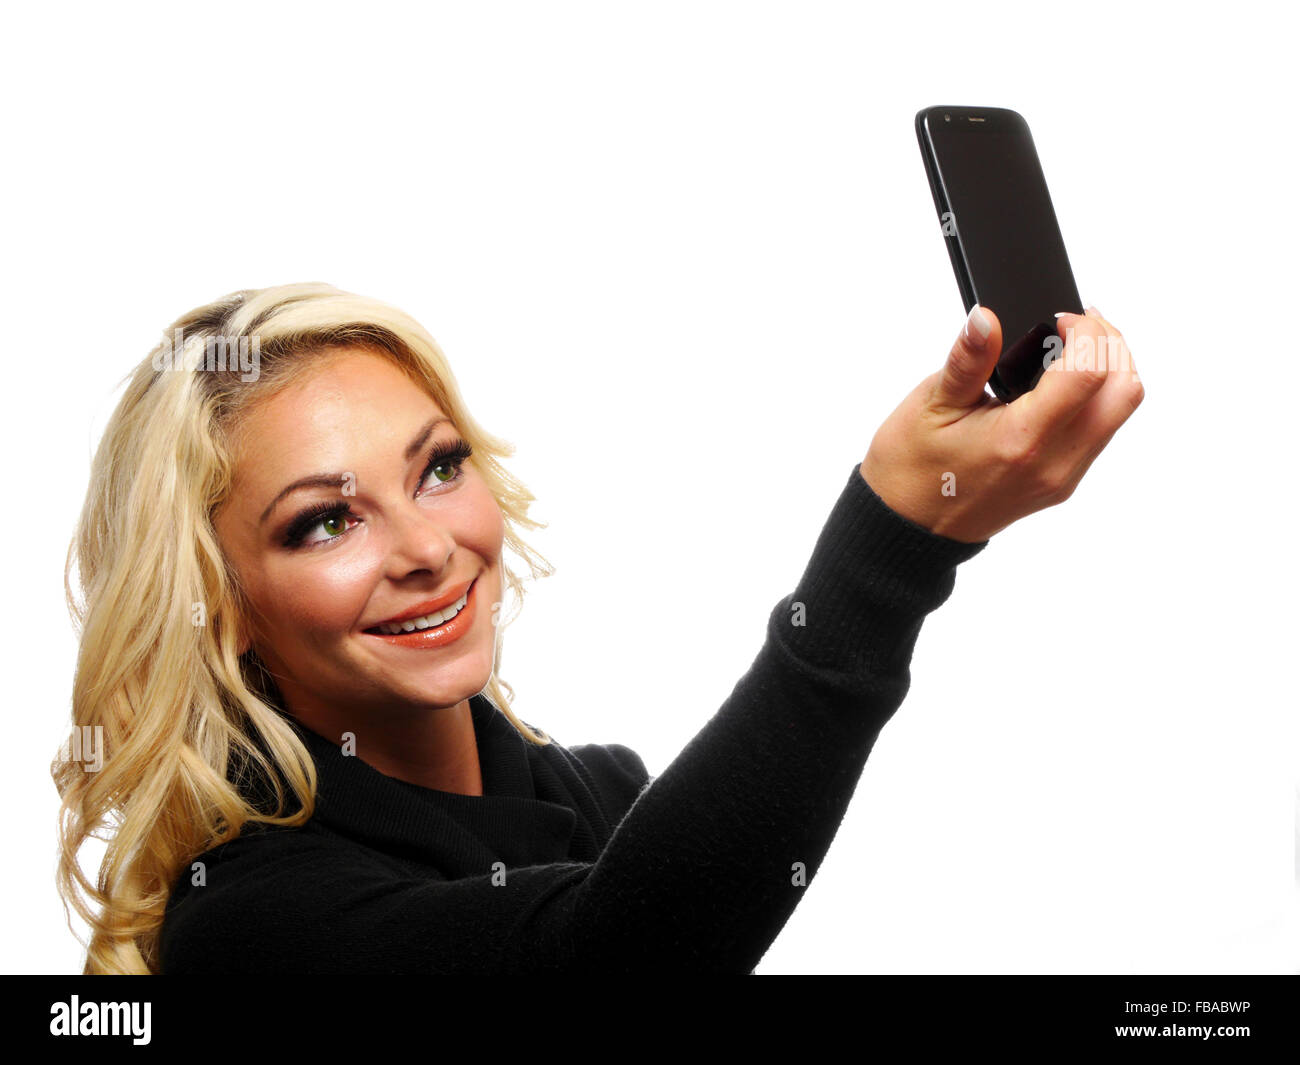 A attractive blond woman is taking her picture with her cell phone camera. Stock Photo